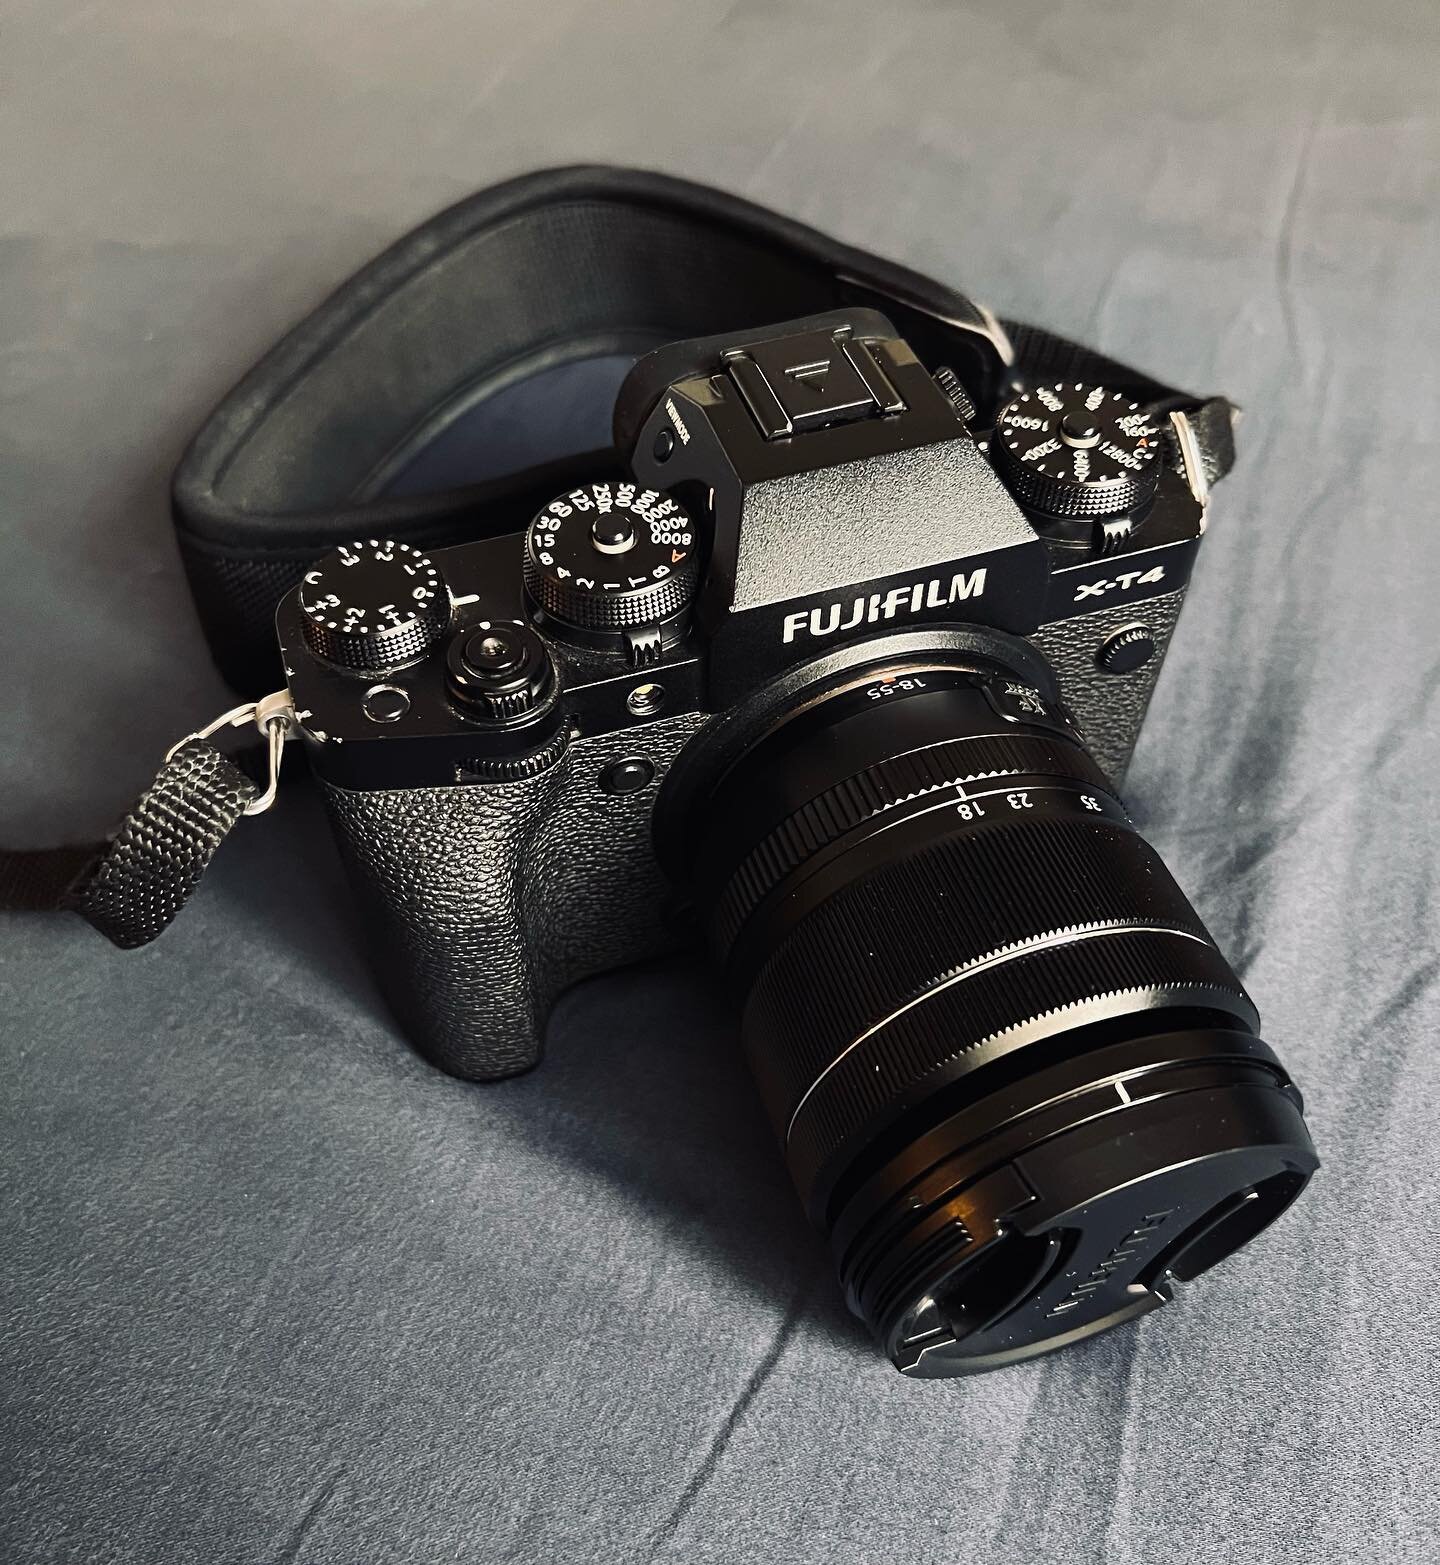 Invested in myself today and purchased my first camera from @nationalcamera!
.
I&rsquo;m really excited to learn something new and share the stories I can capture with this #fujifilmxt4
.
#fujifilm #mirrorlesscamera #photography #firstcamera #minneap